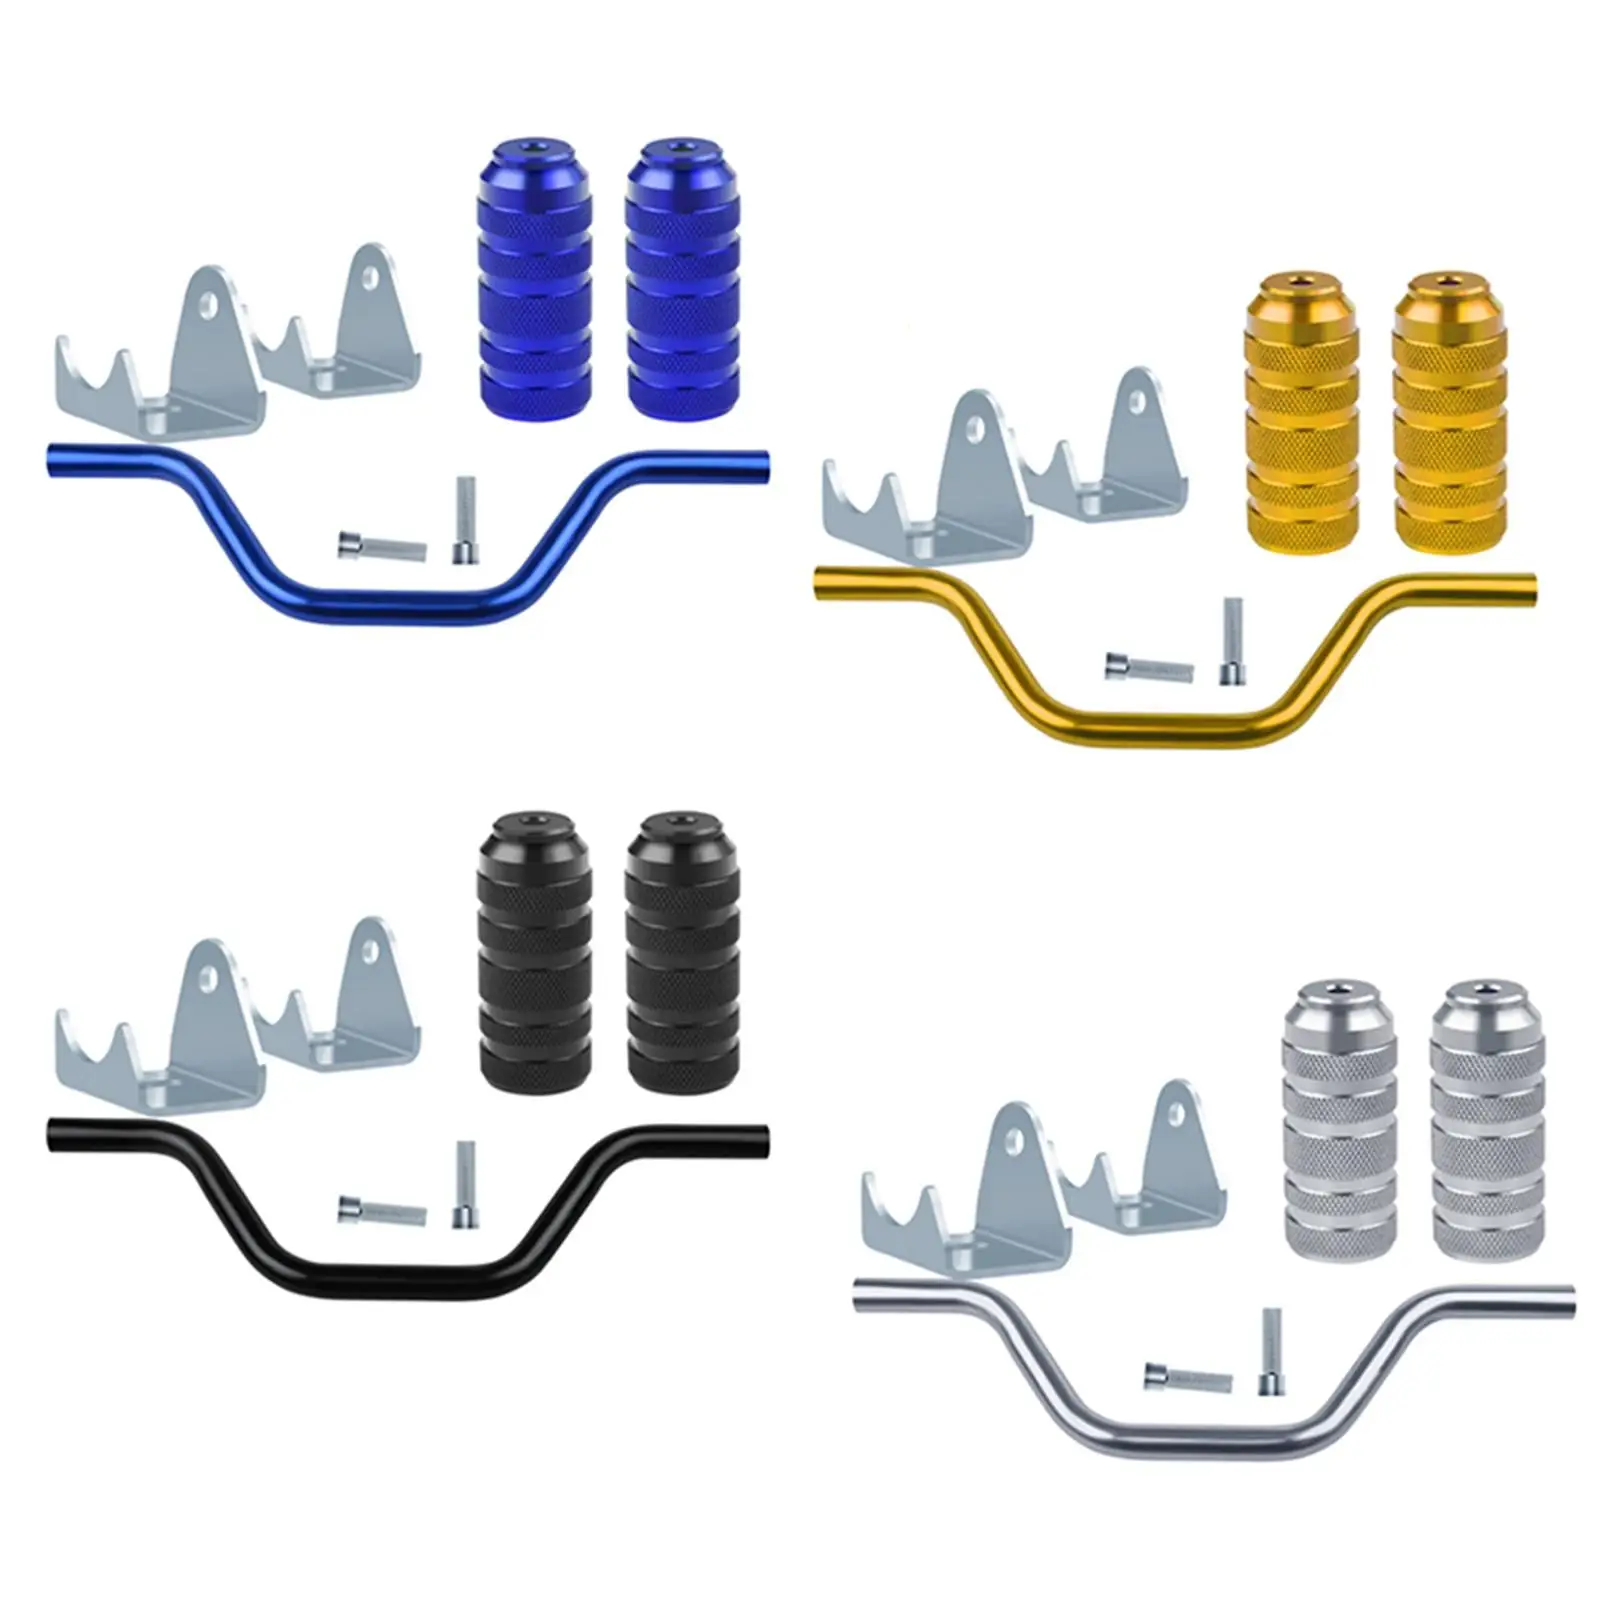  Foot Pegs Pedals Accessories CNC for Dirt Bike Moped Scooter